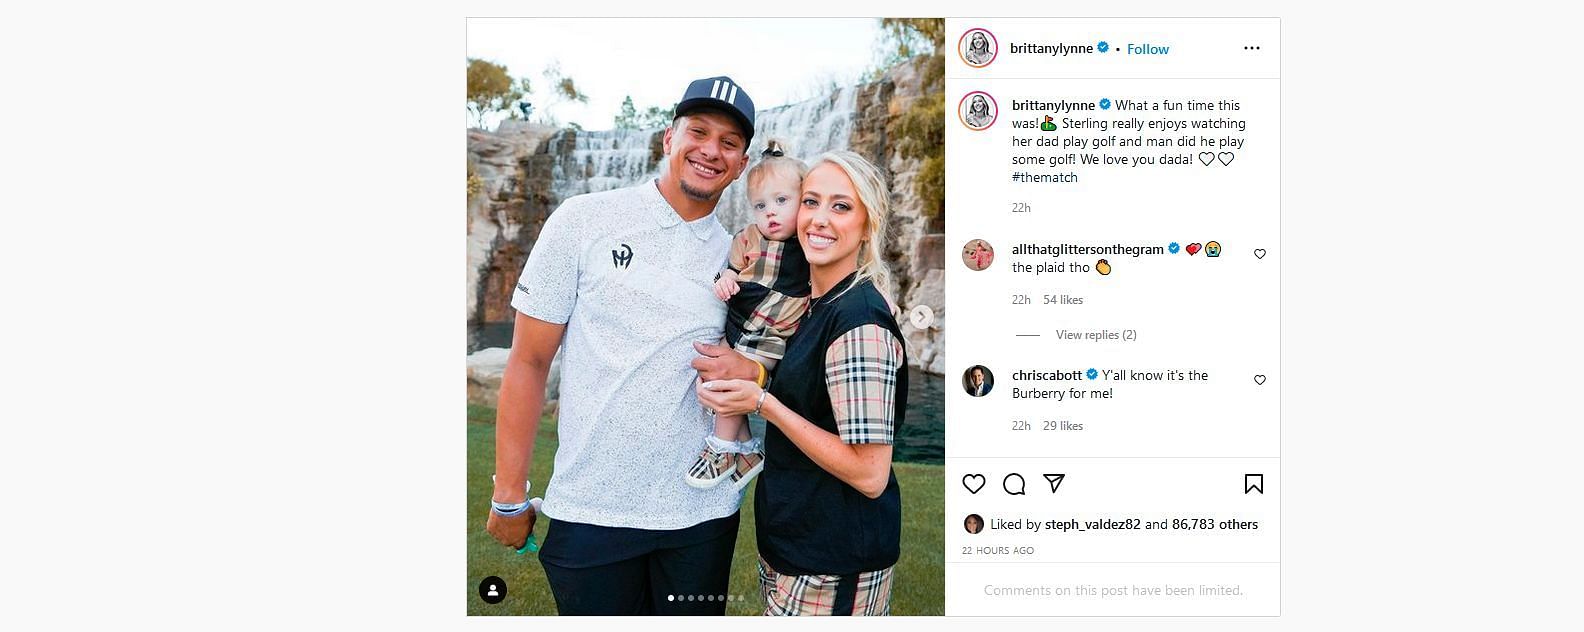 Brittany Mahomes and Patrick Mahomes | @brittanylynn Instagram